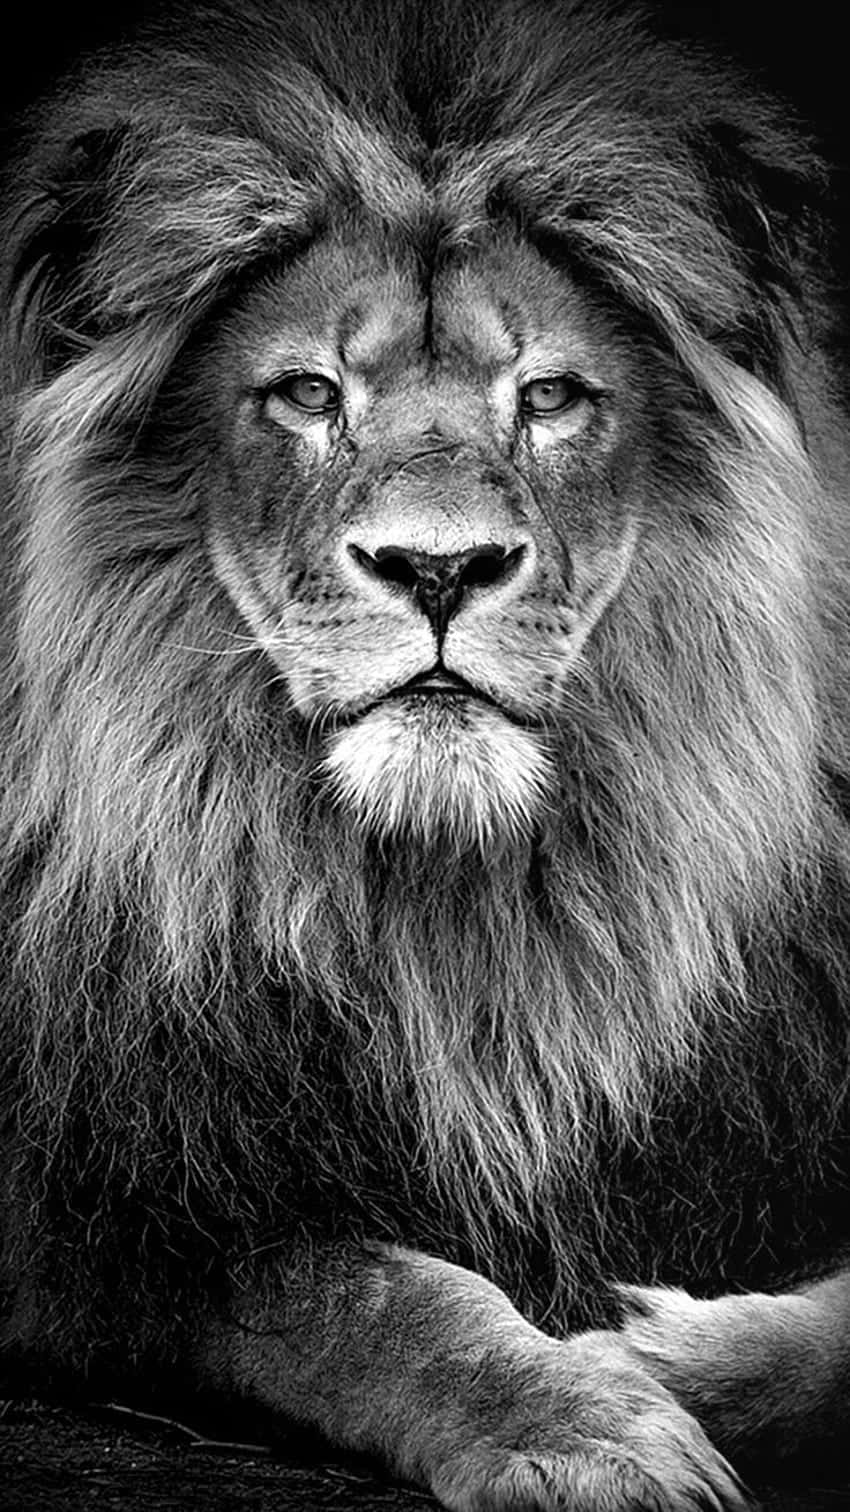 Download Majestic Black and White Lion Wallpaper | Wallpapers.com